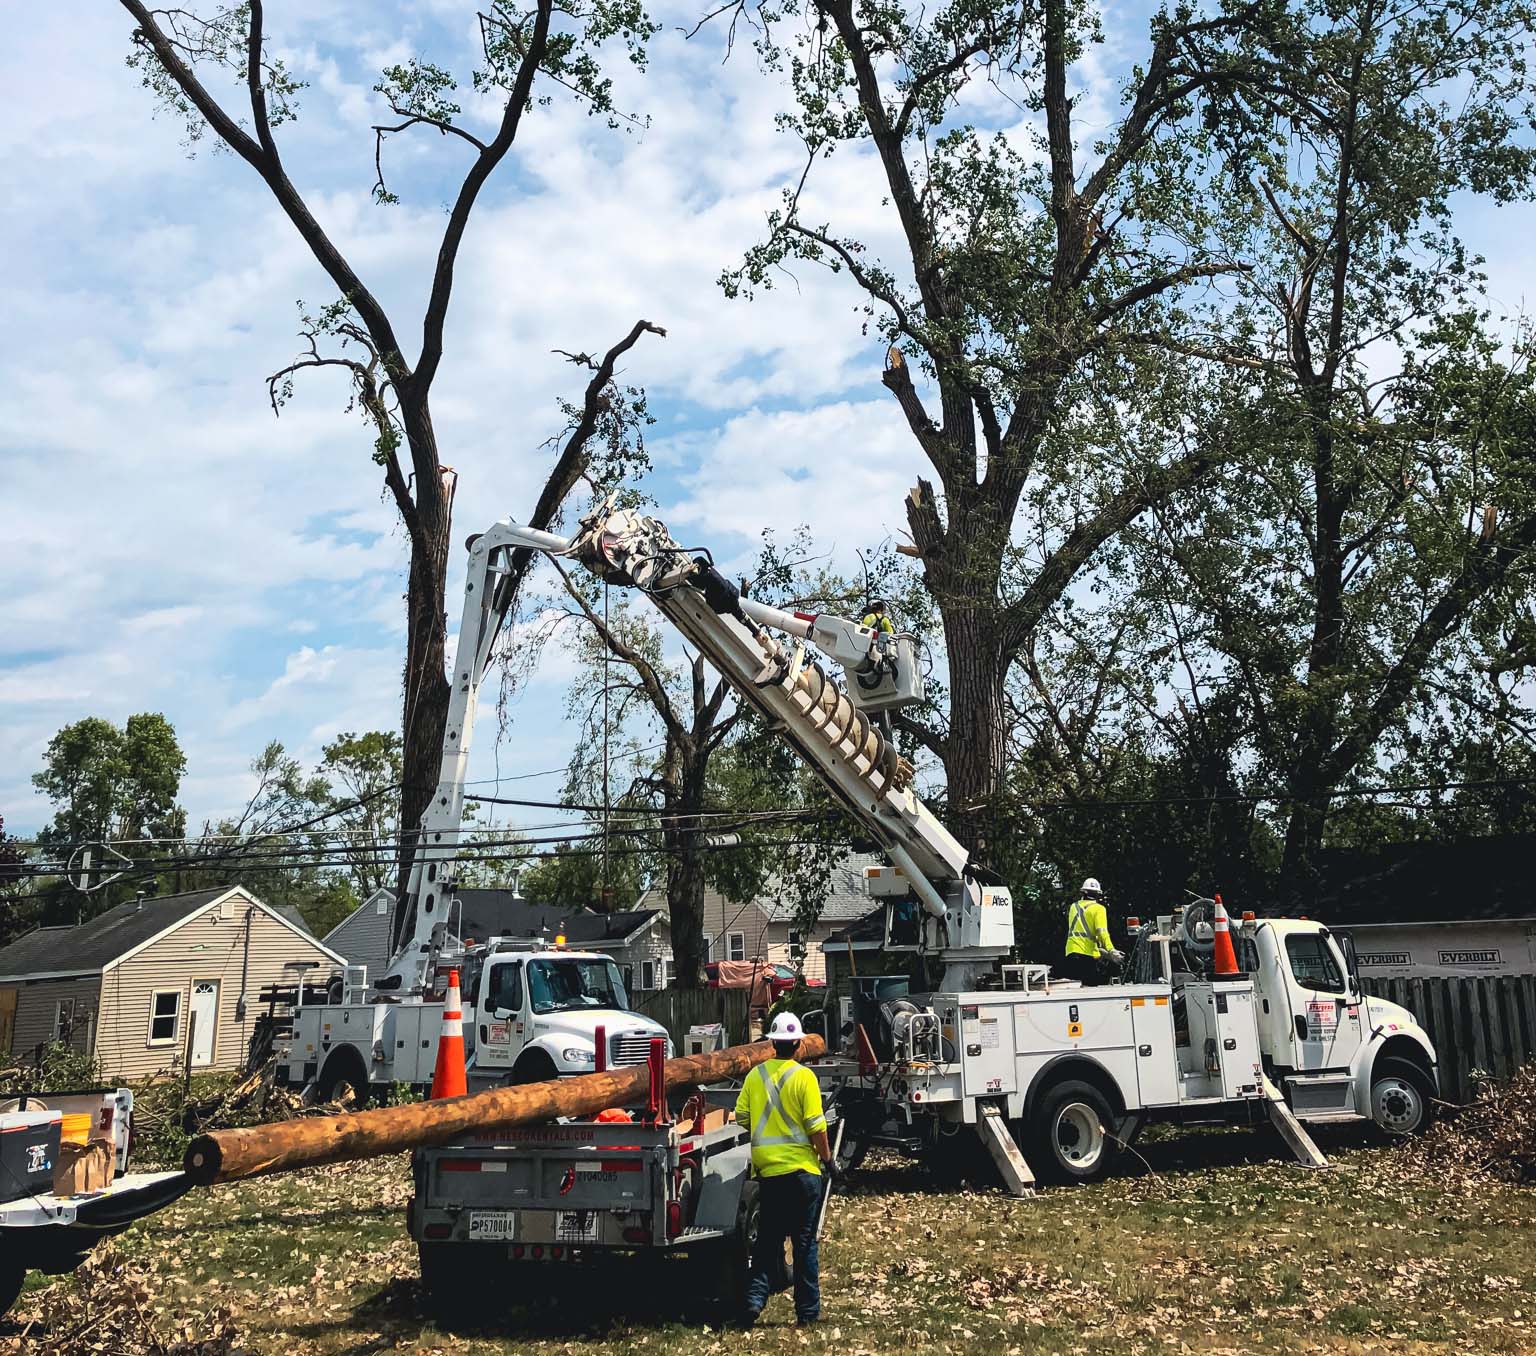 Restoration workers collecting debris from a damaged tree